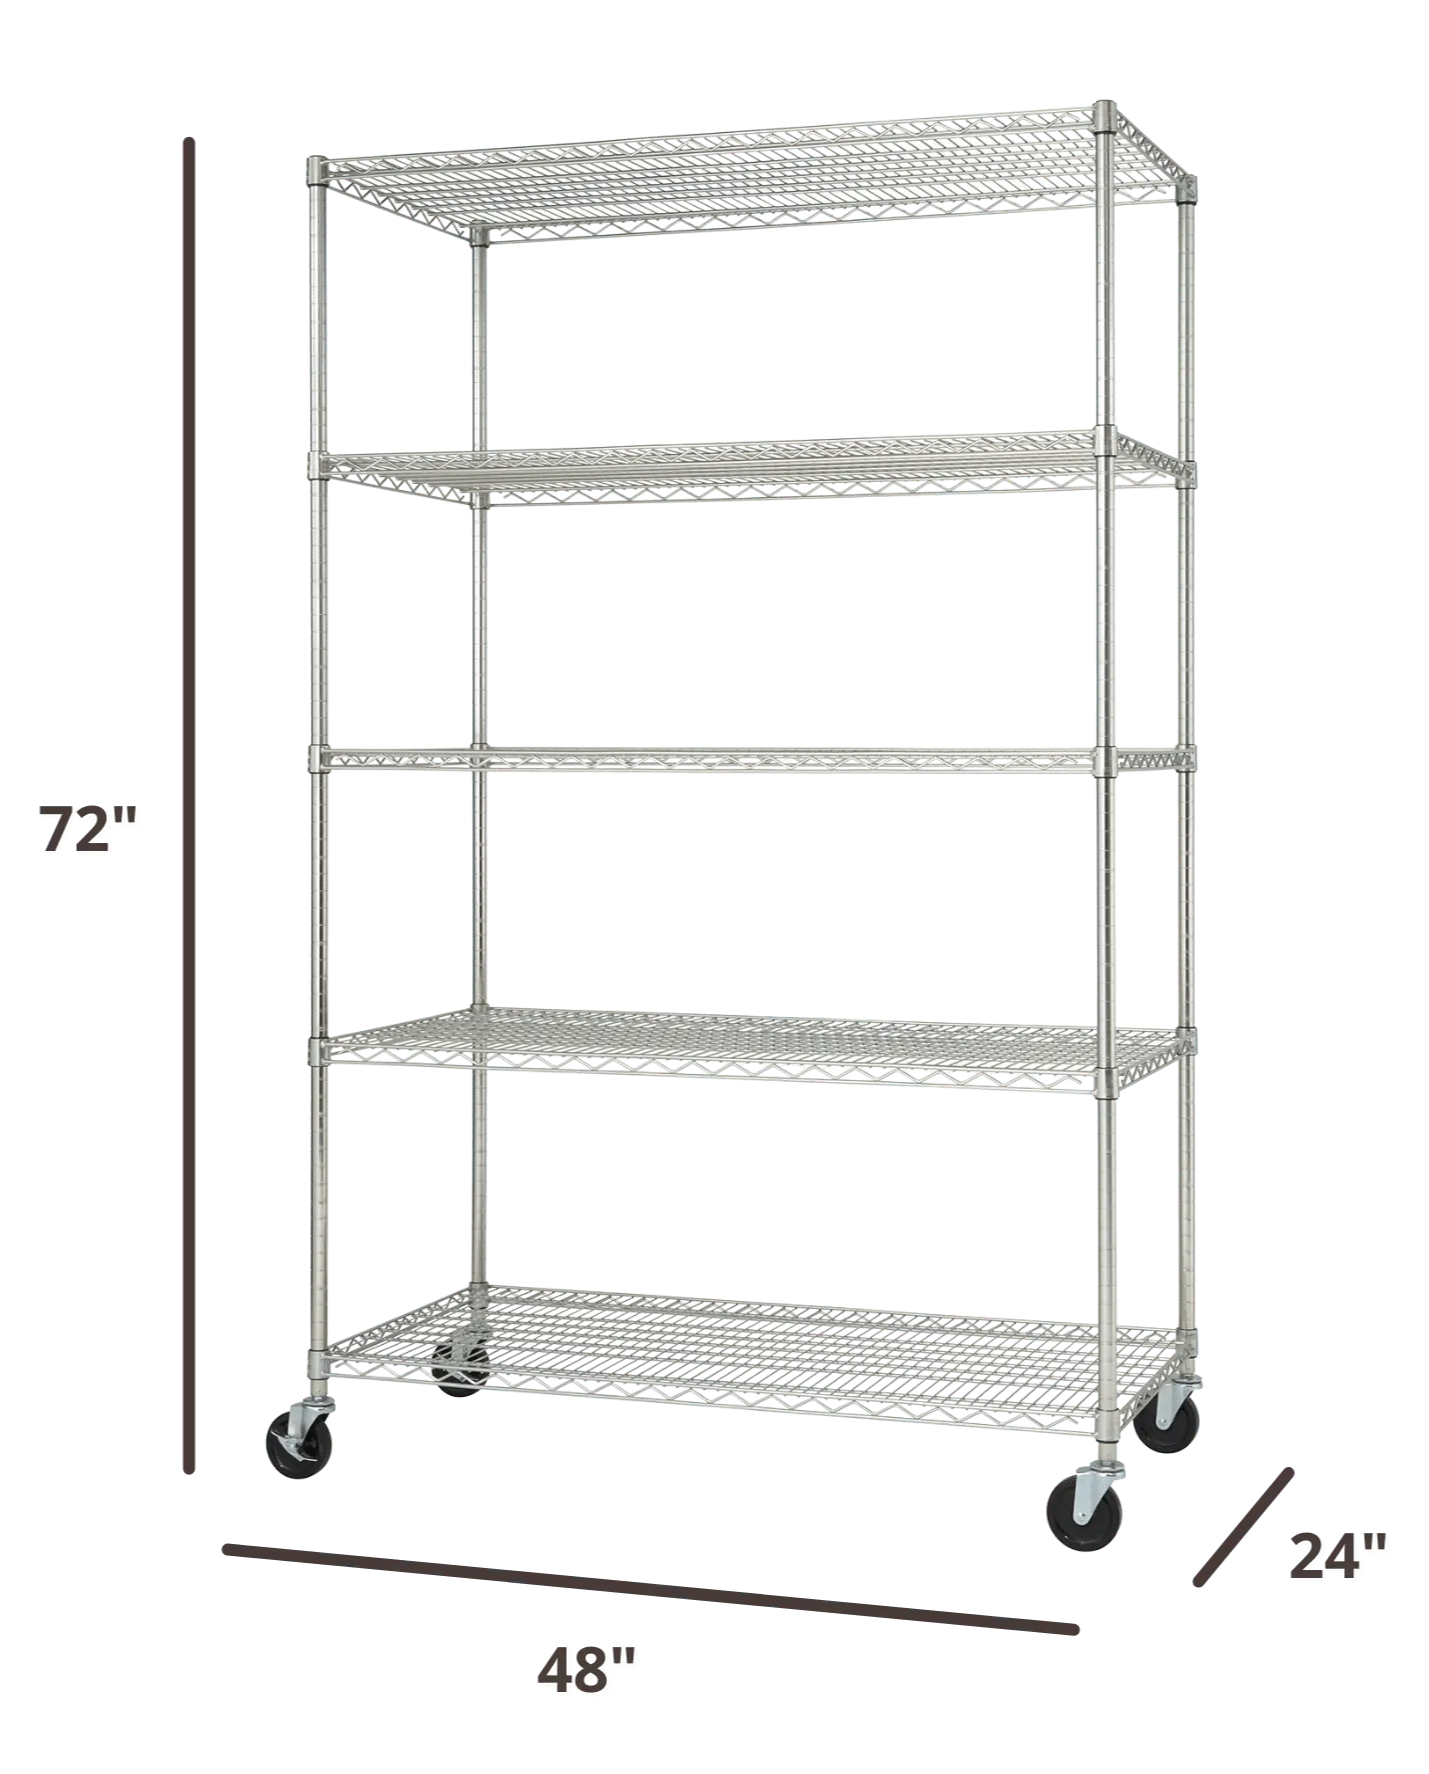 48 inches wide by 24 inches deep wire shelving rack